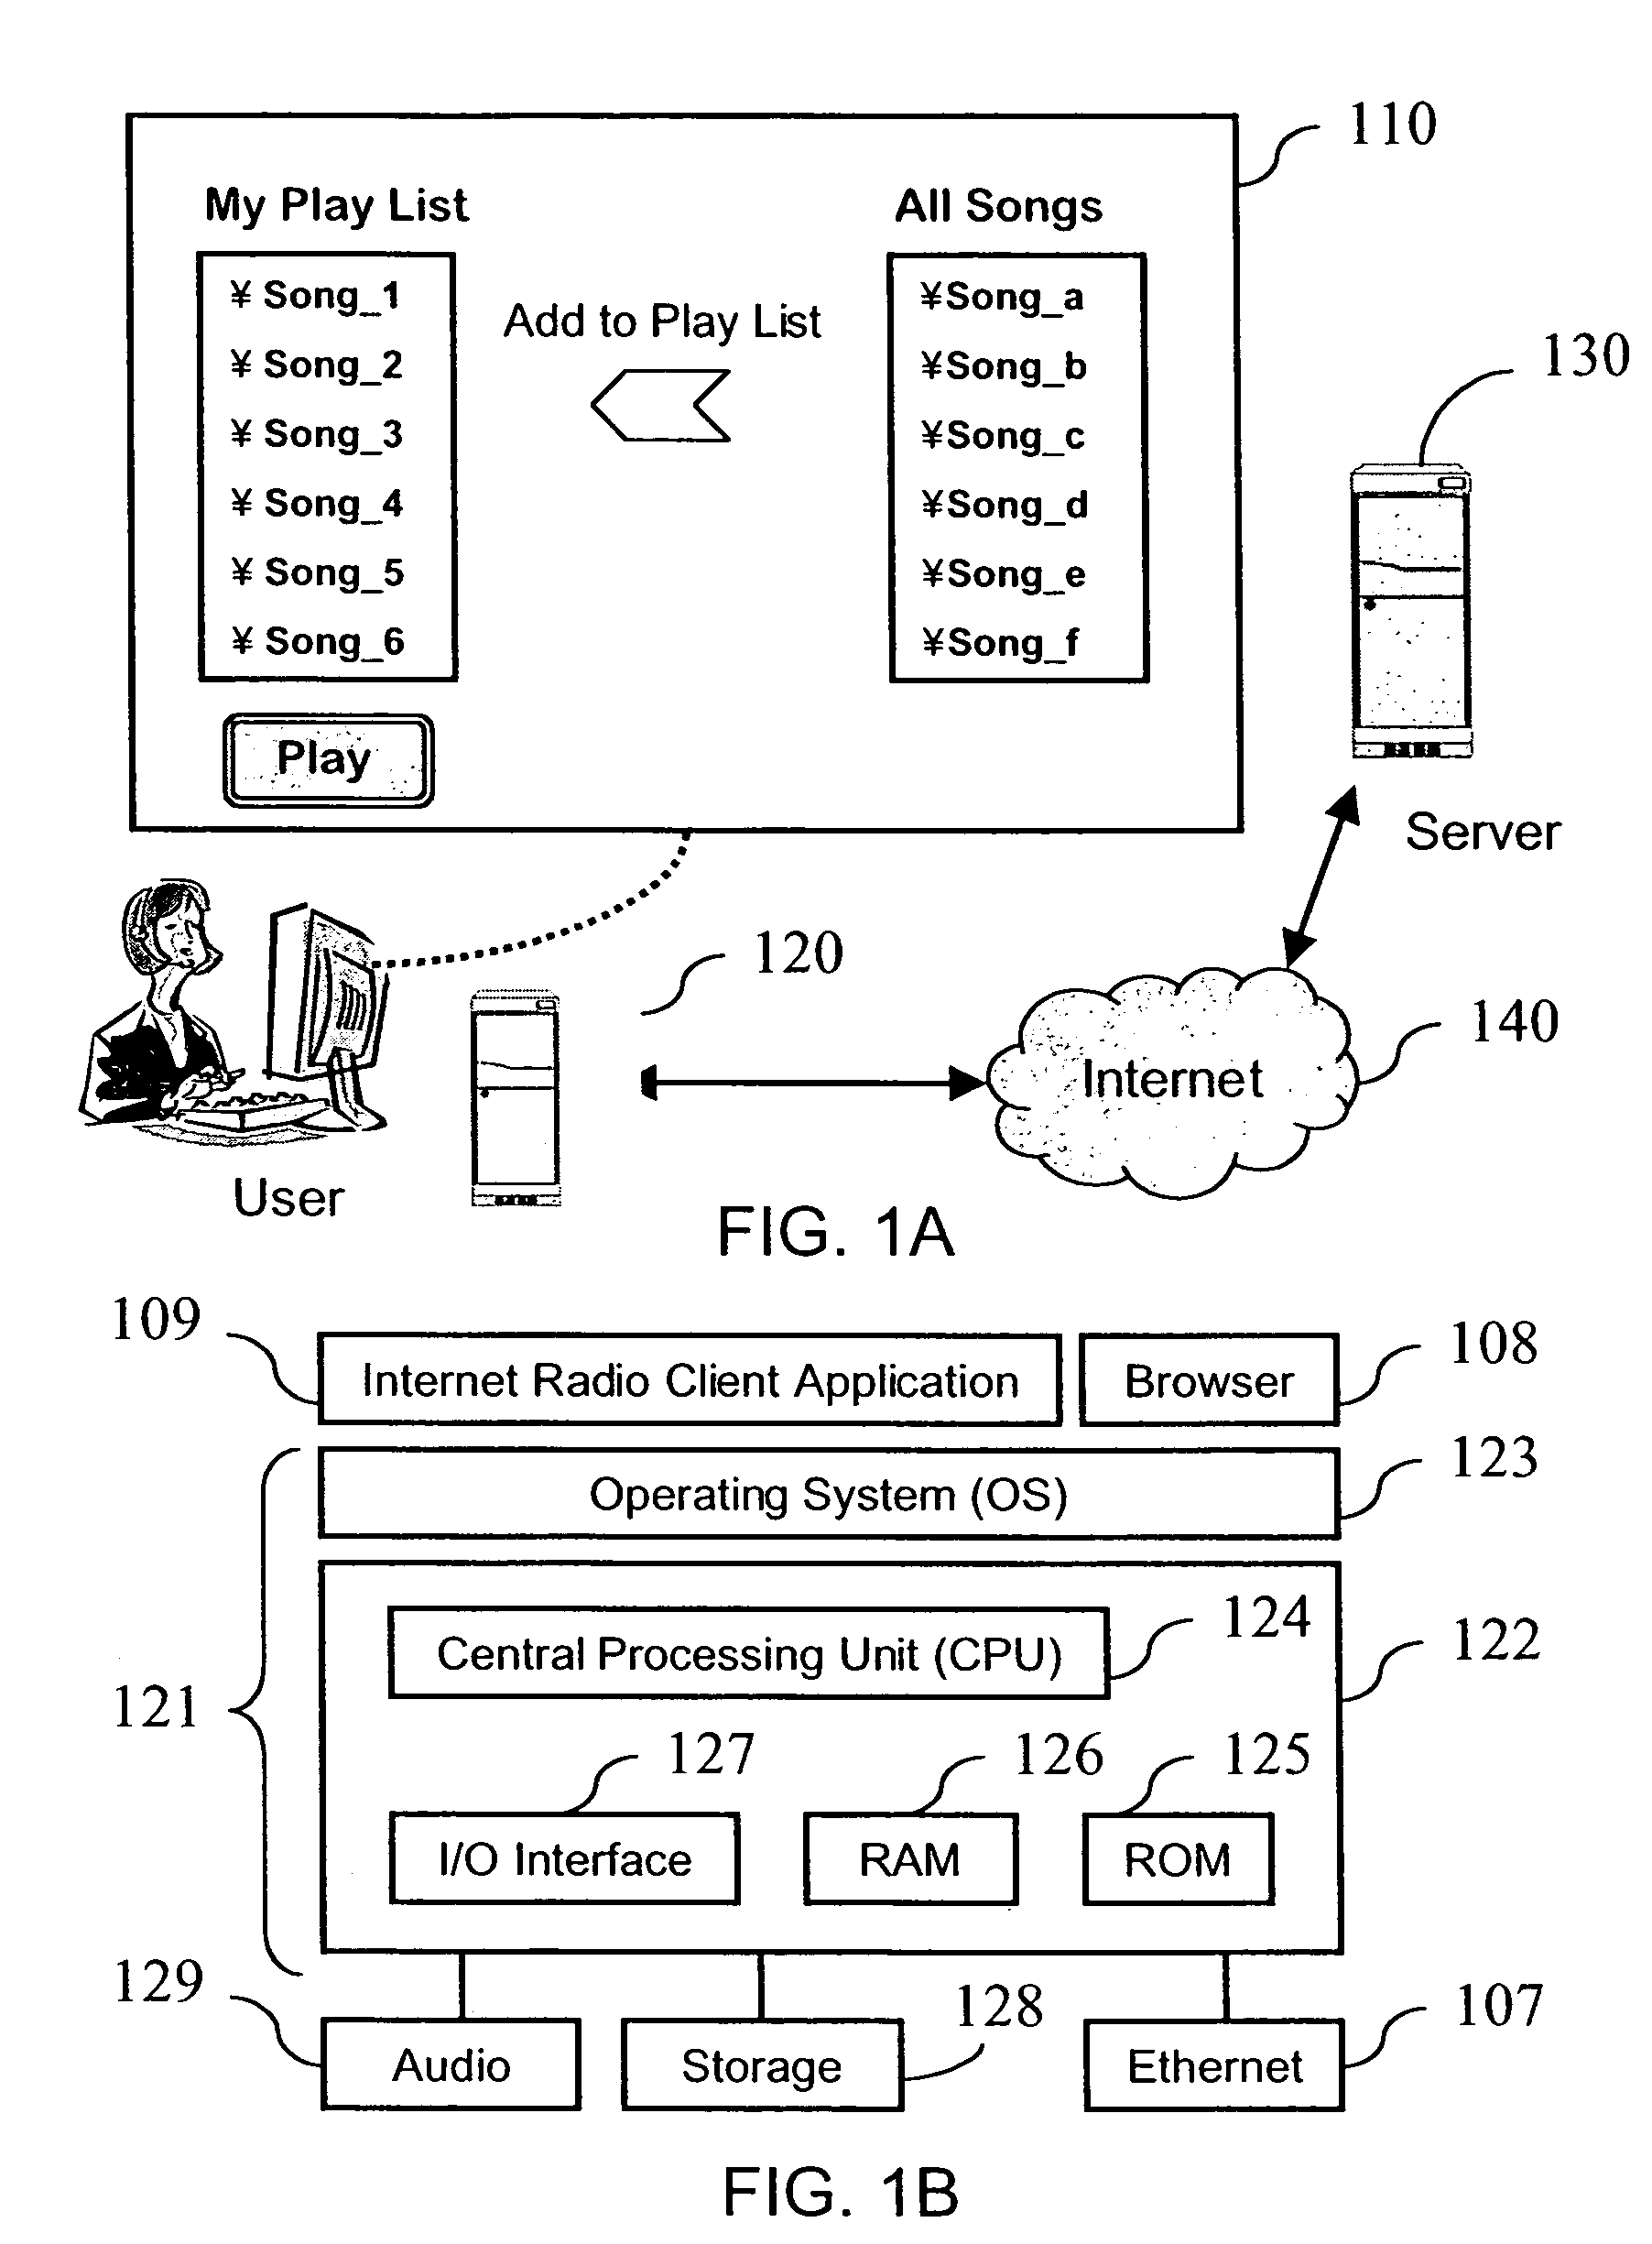 Apparatus and method for skipping songs without delay